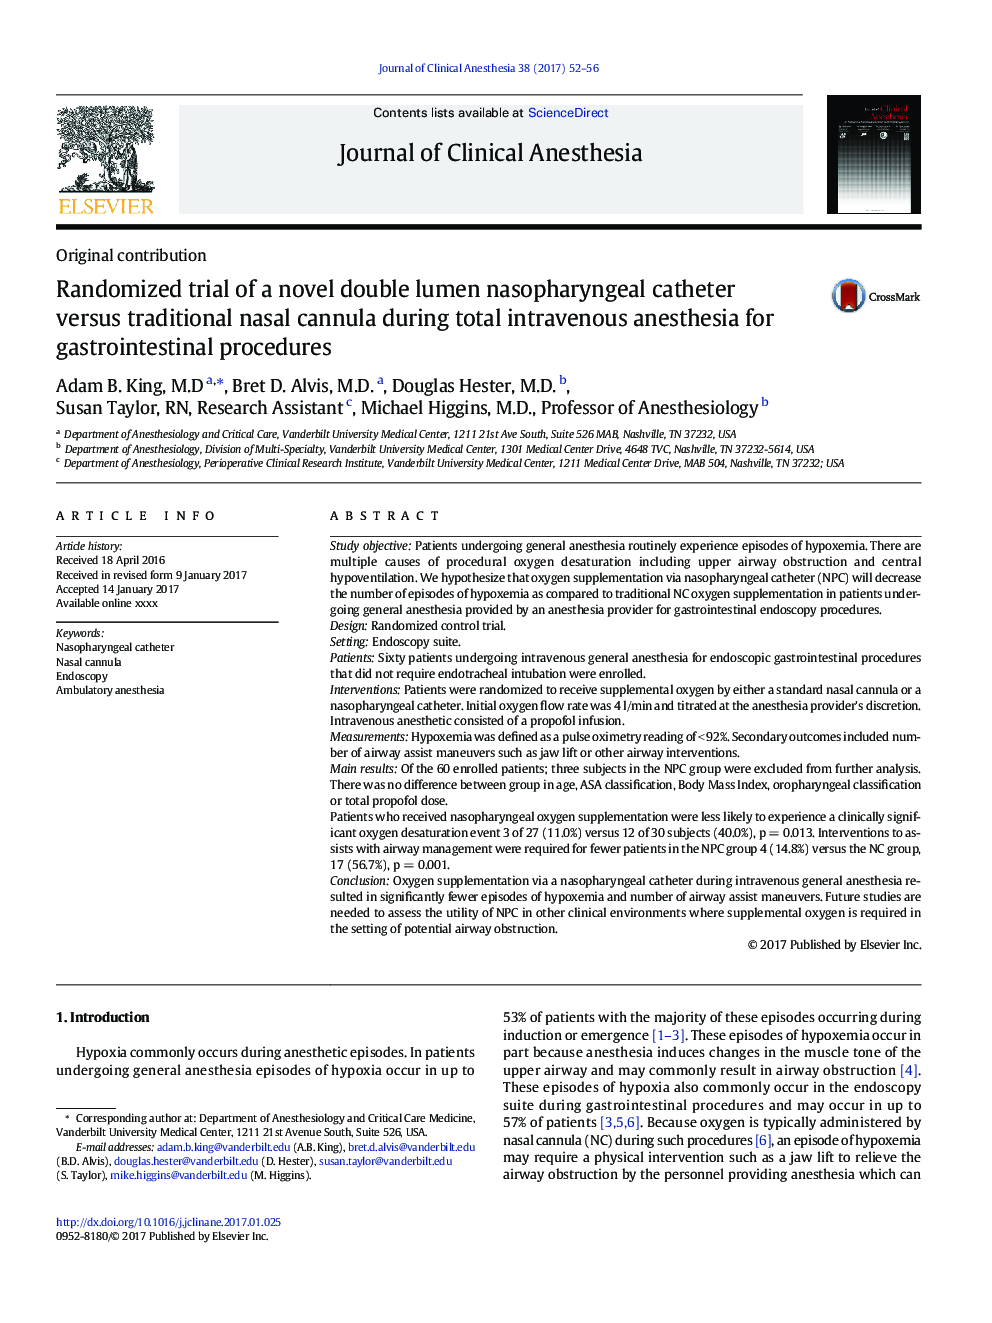 Randomized trial of a novel double lumen nasopharyngeal catheter versus traditional nasal cannula during total intravenous anesthesia for gastrointestinal procedures